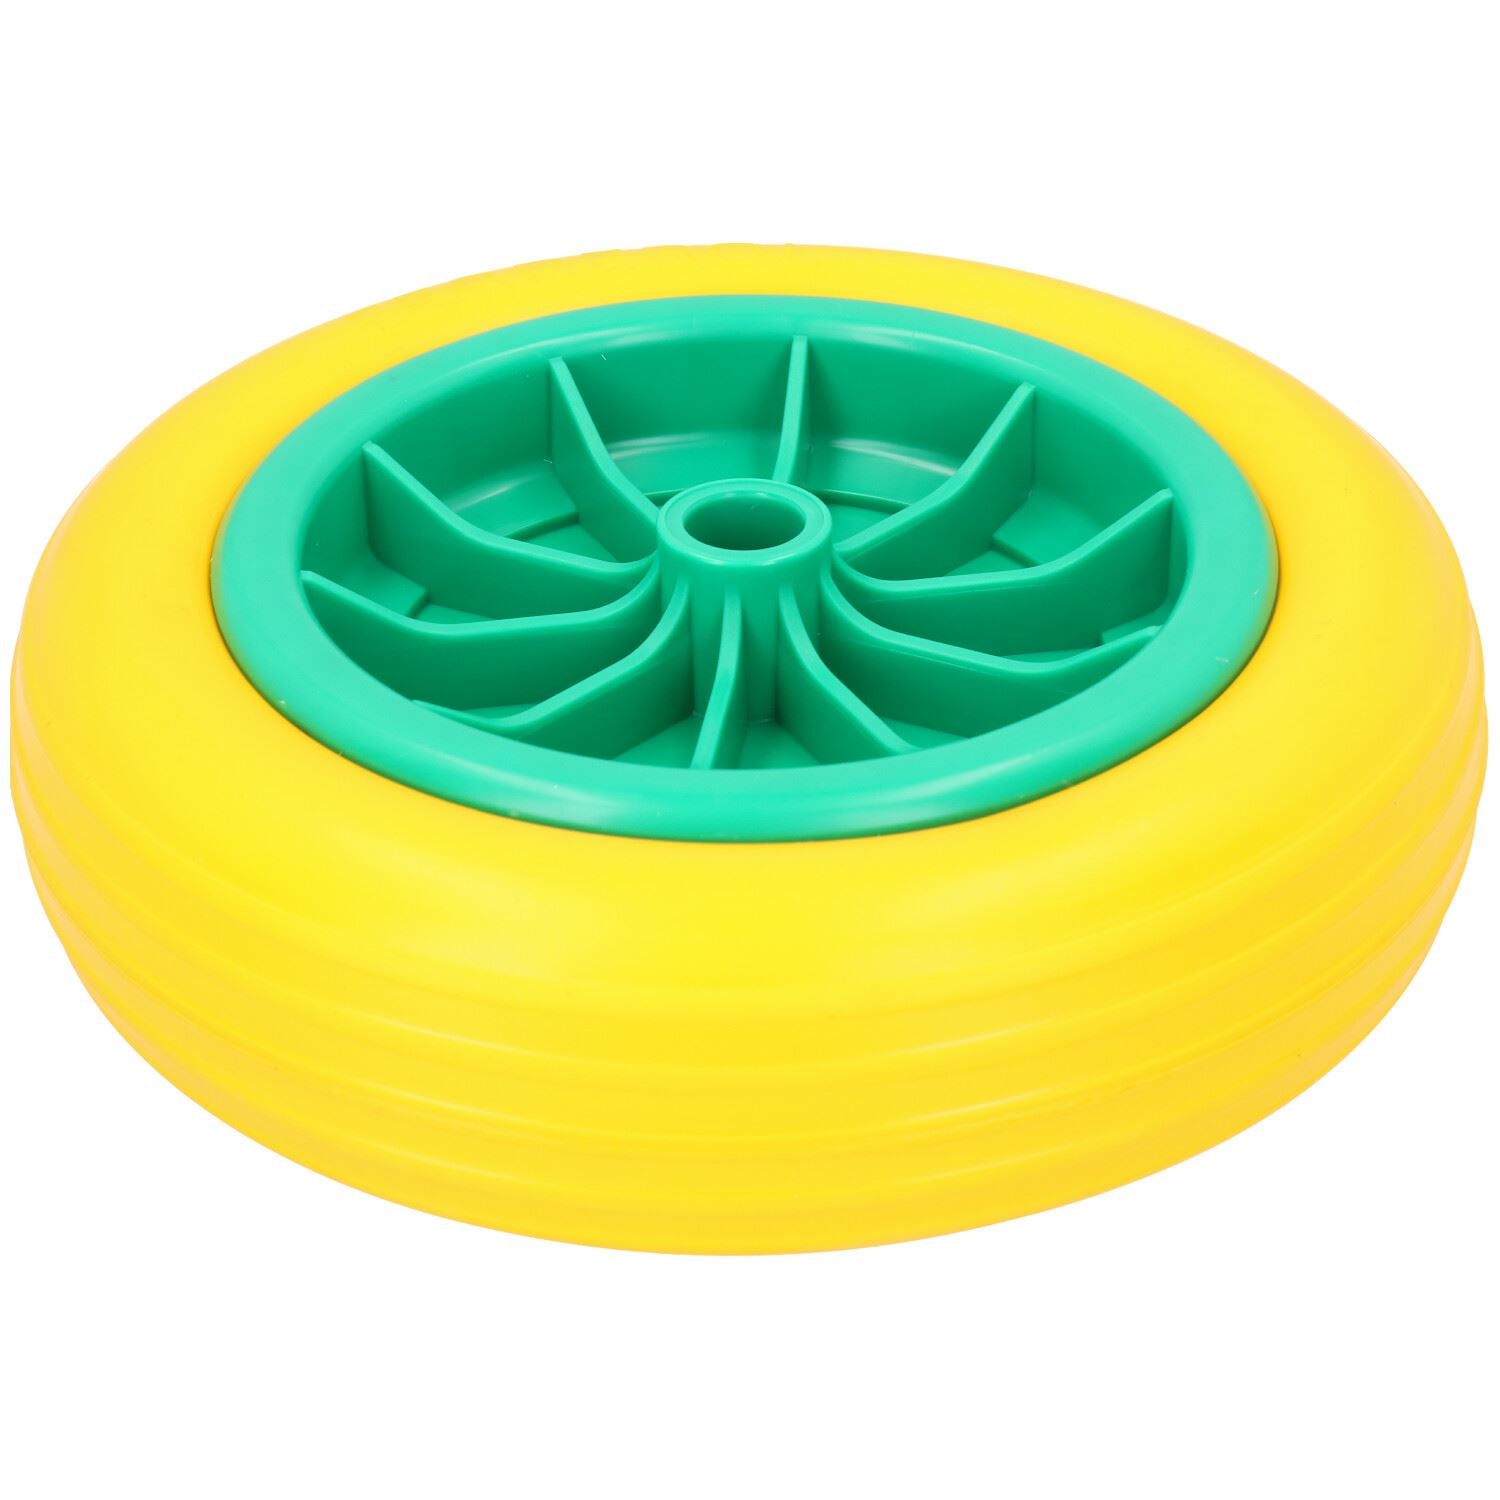 10” Solid Rubber Tyre For Sack Trucks Wheel Barrows Trolleys 20mm Centre